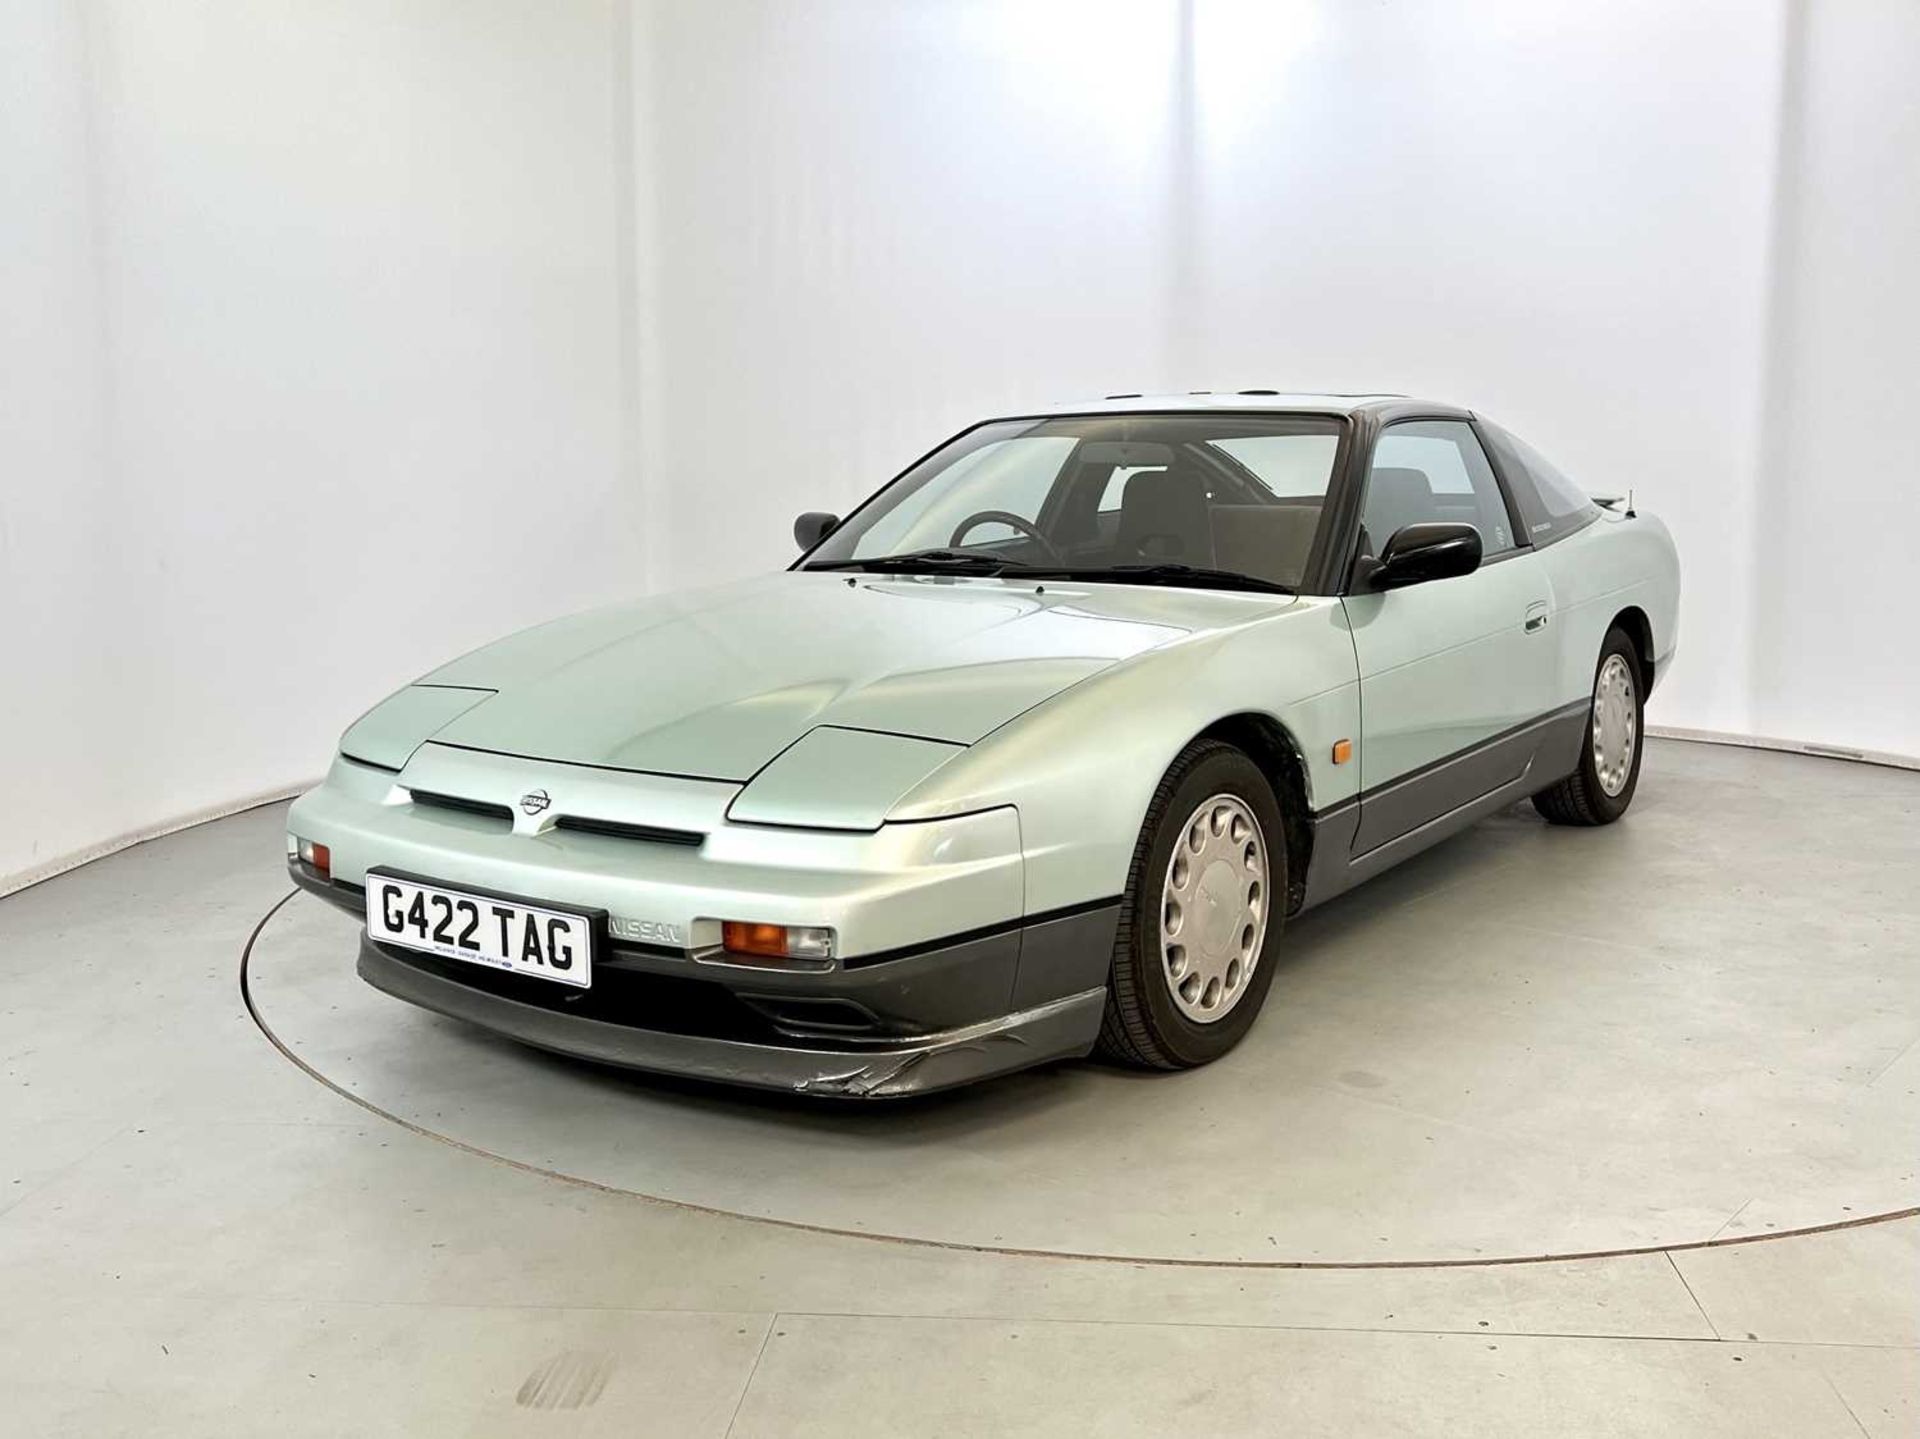 1990 Nissan 200SX - Image 3 of 30